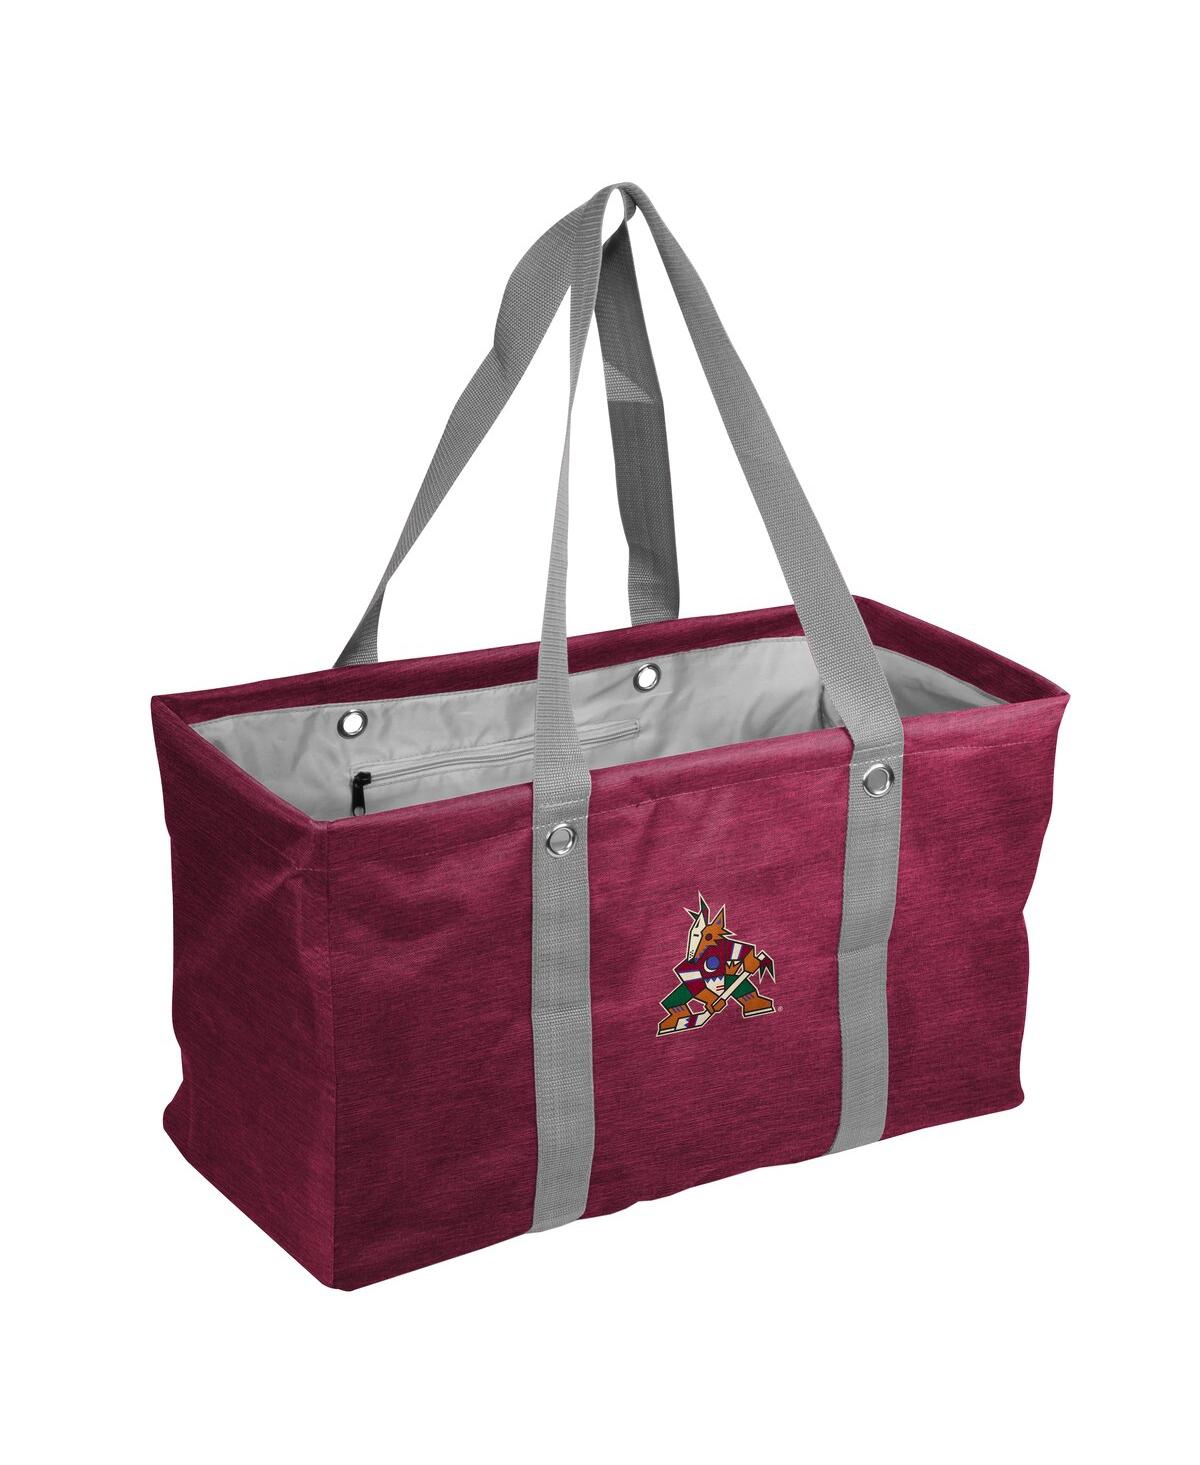 Arizona Coyotes Crosshatch Picnic Caddy Tote Bag - Red